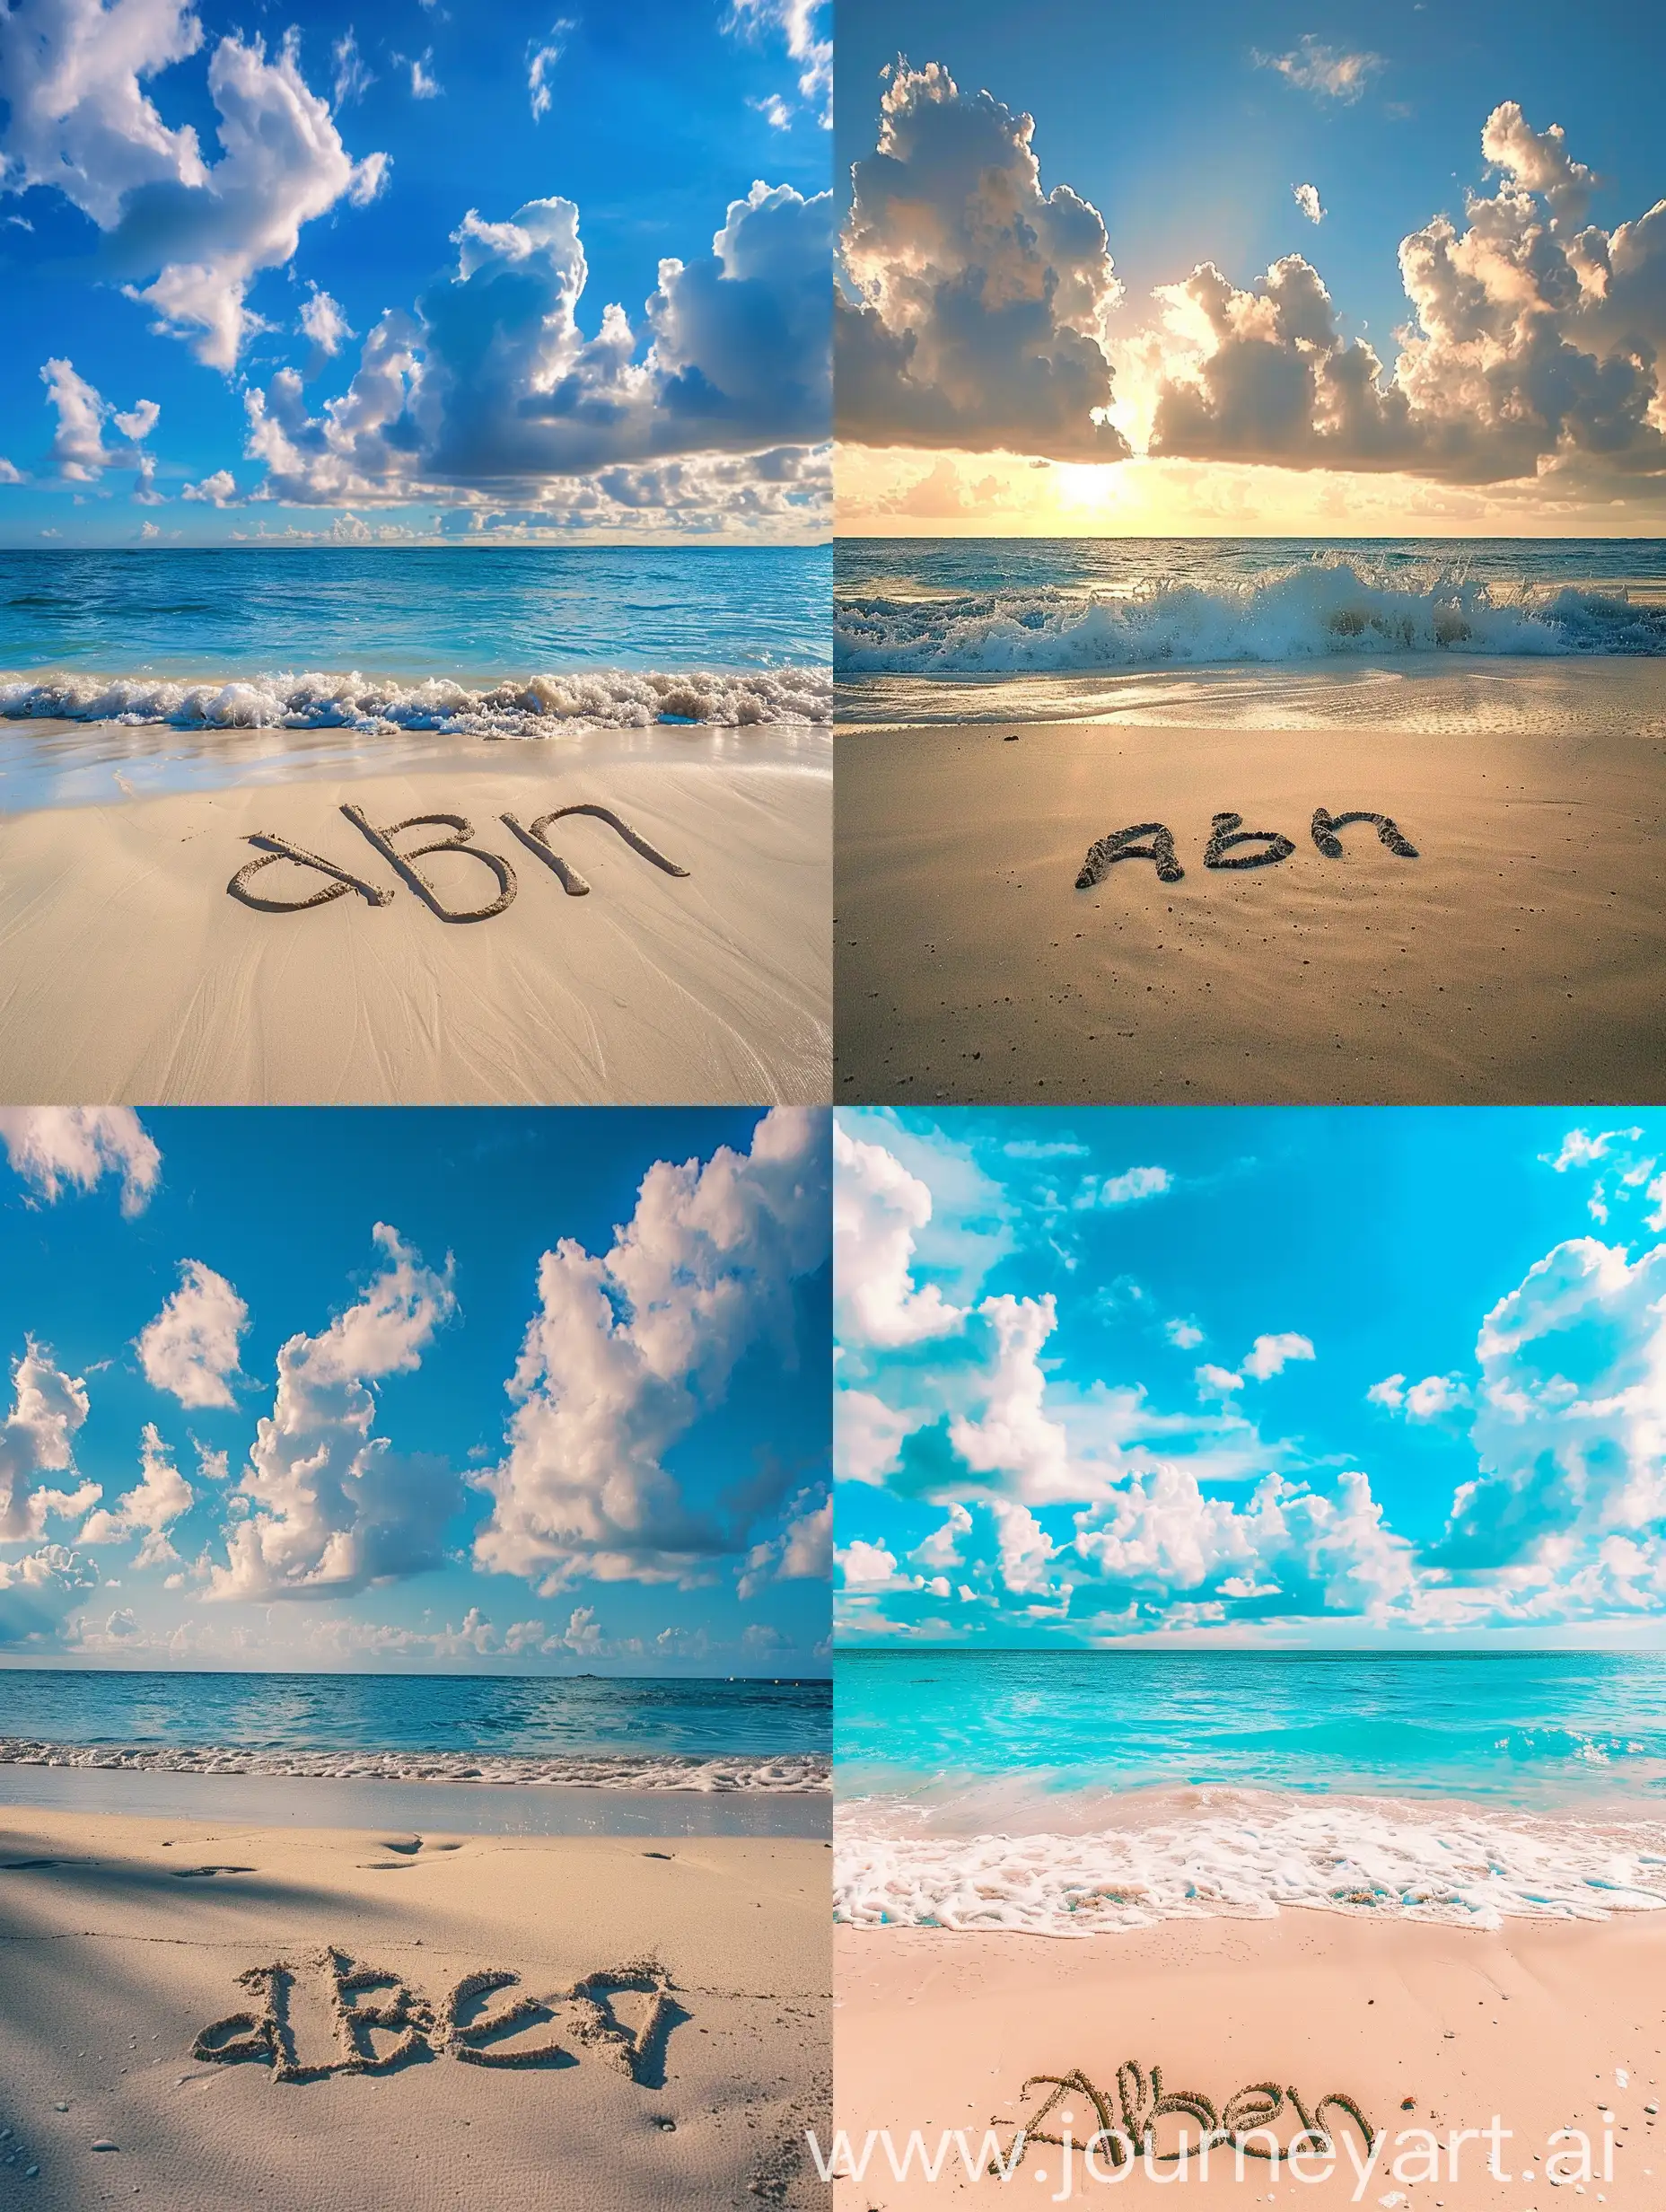 beautiful beach sand, blue sea and blue and white clouds during the day on the beach sand, the name "aben" is written in clear, natural HD